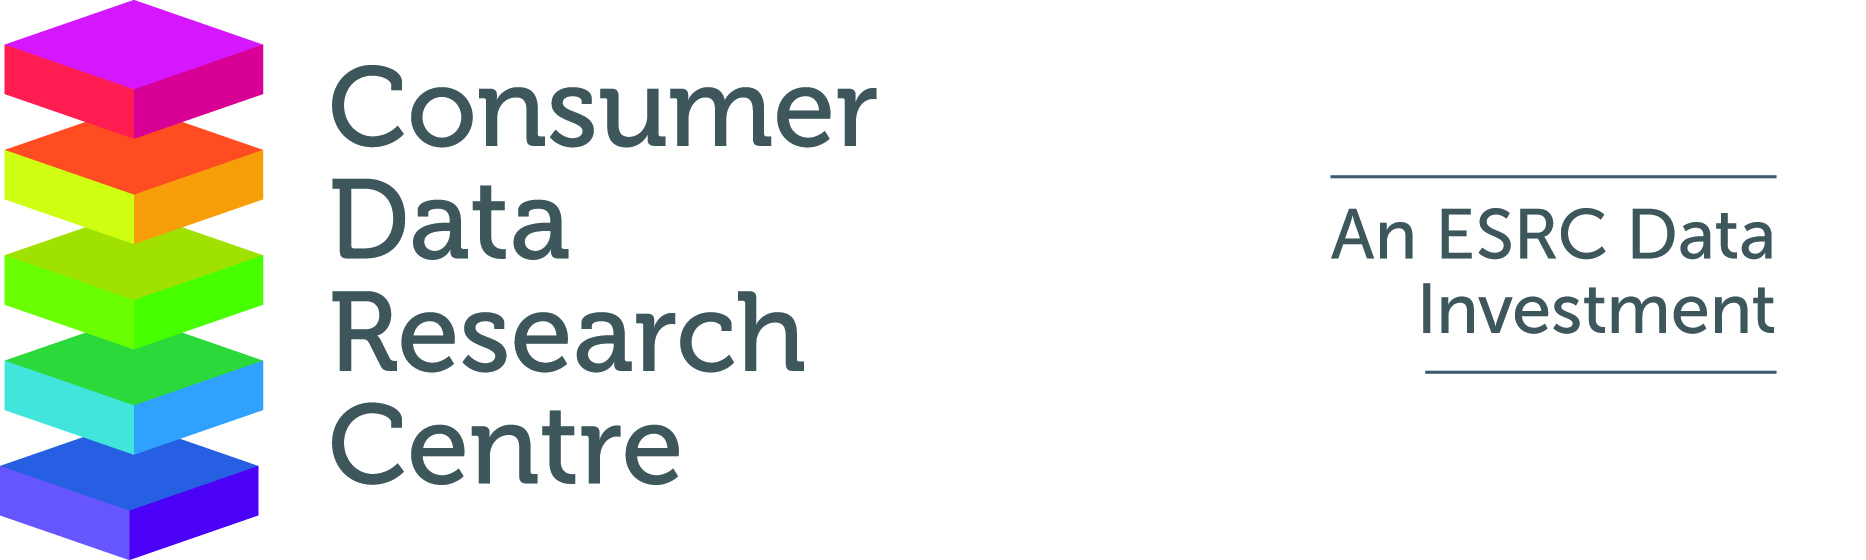 Consumer Data Research Centre (CDRC) | Faculty of Environment | University of Leeds